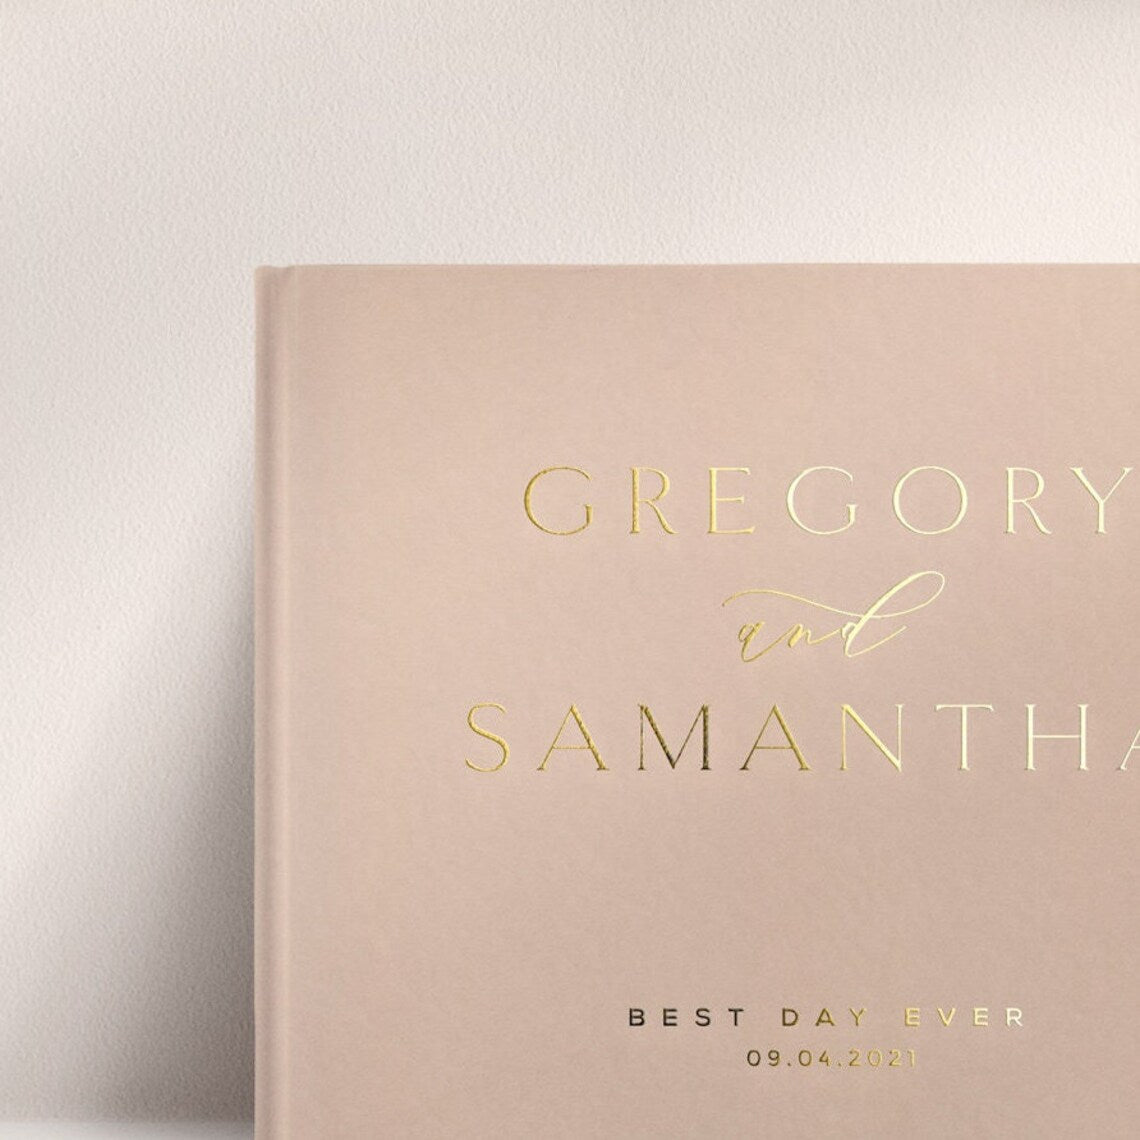 Minimalist Wedding Guest Book, Nude and Gold Foil Wedding Guestbook, Personalized Guest Book, Wedding Photo Book, Peach Nude